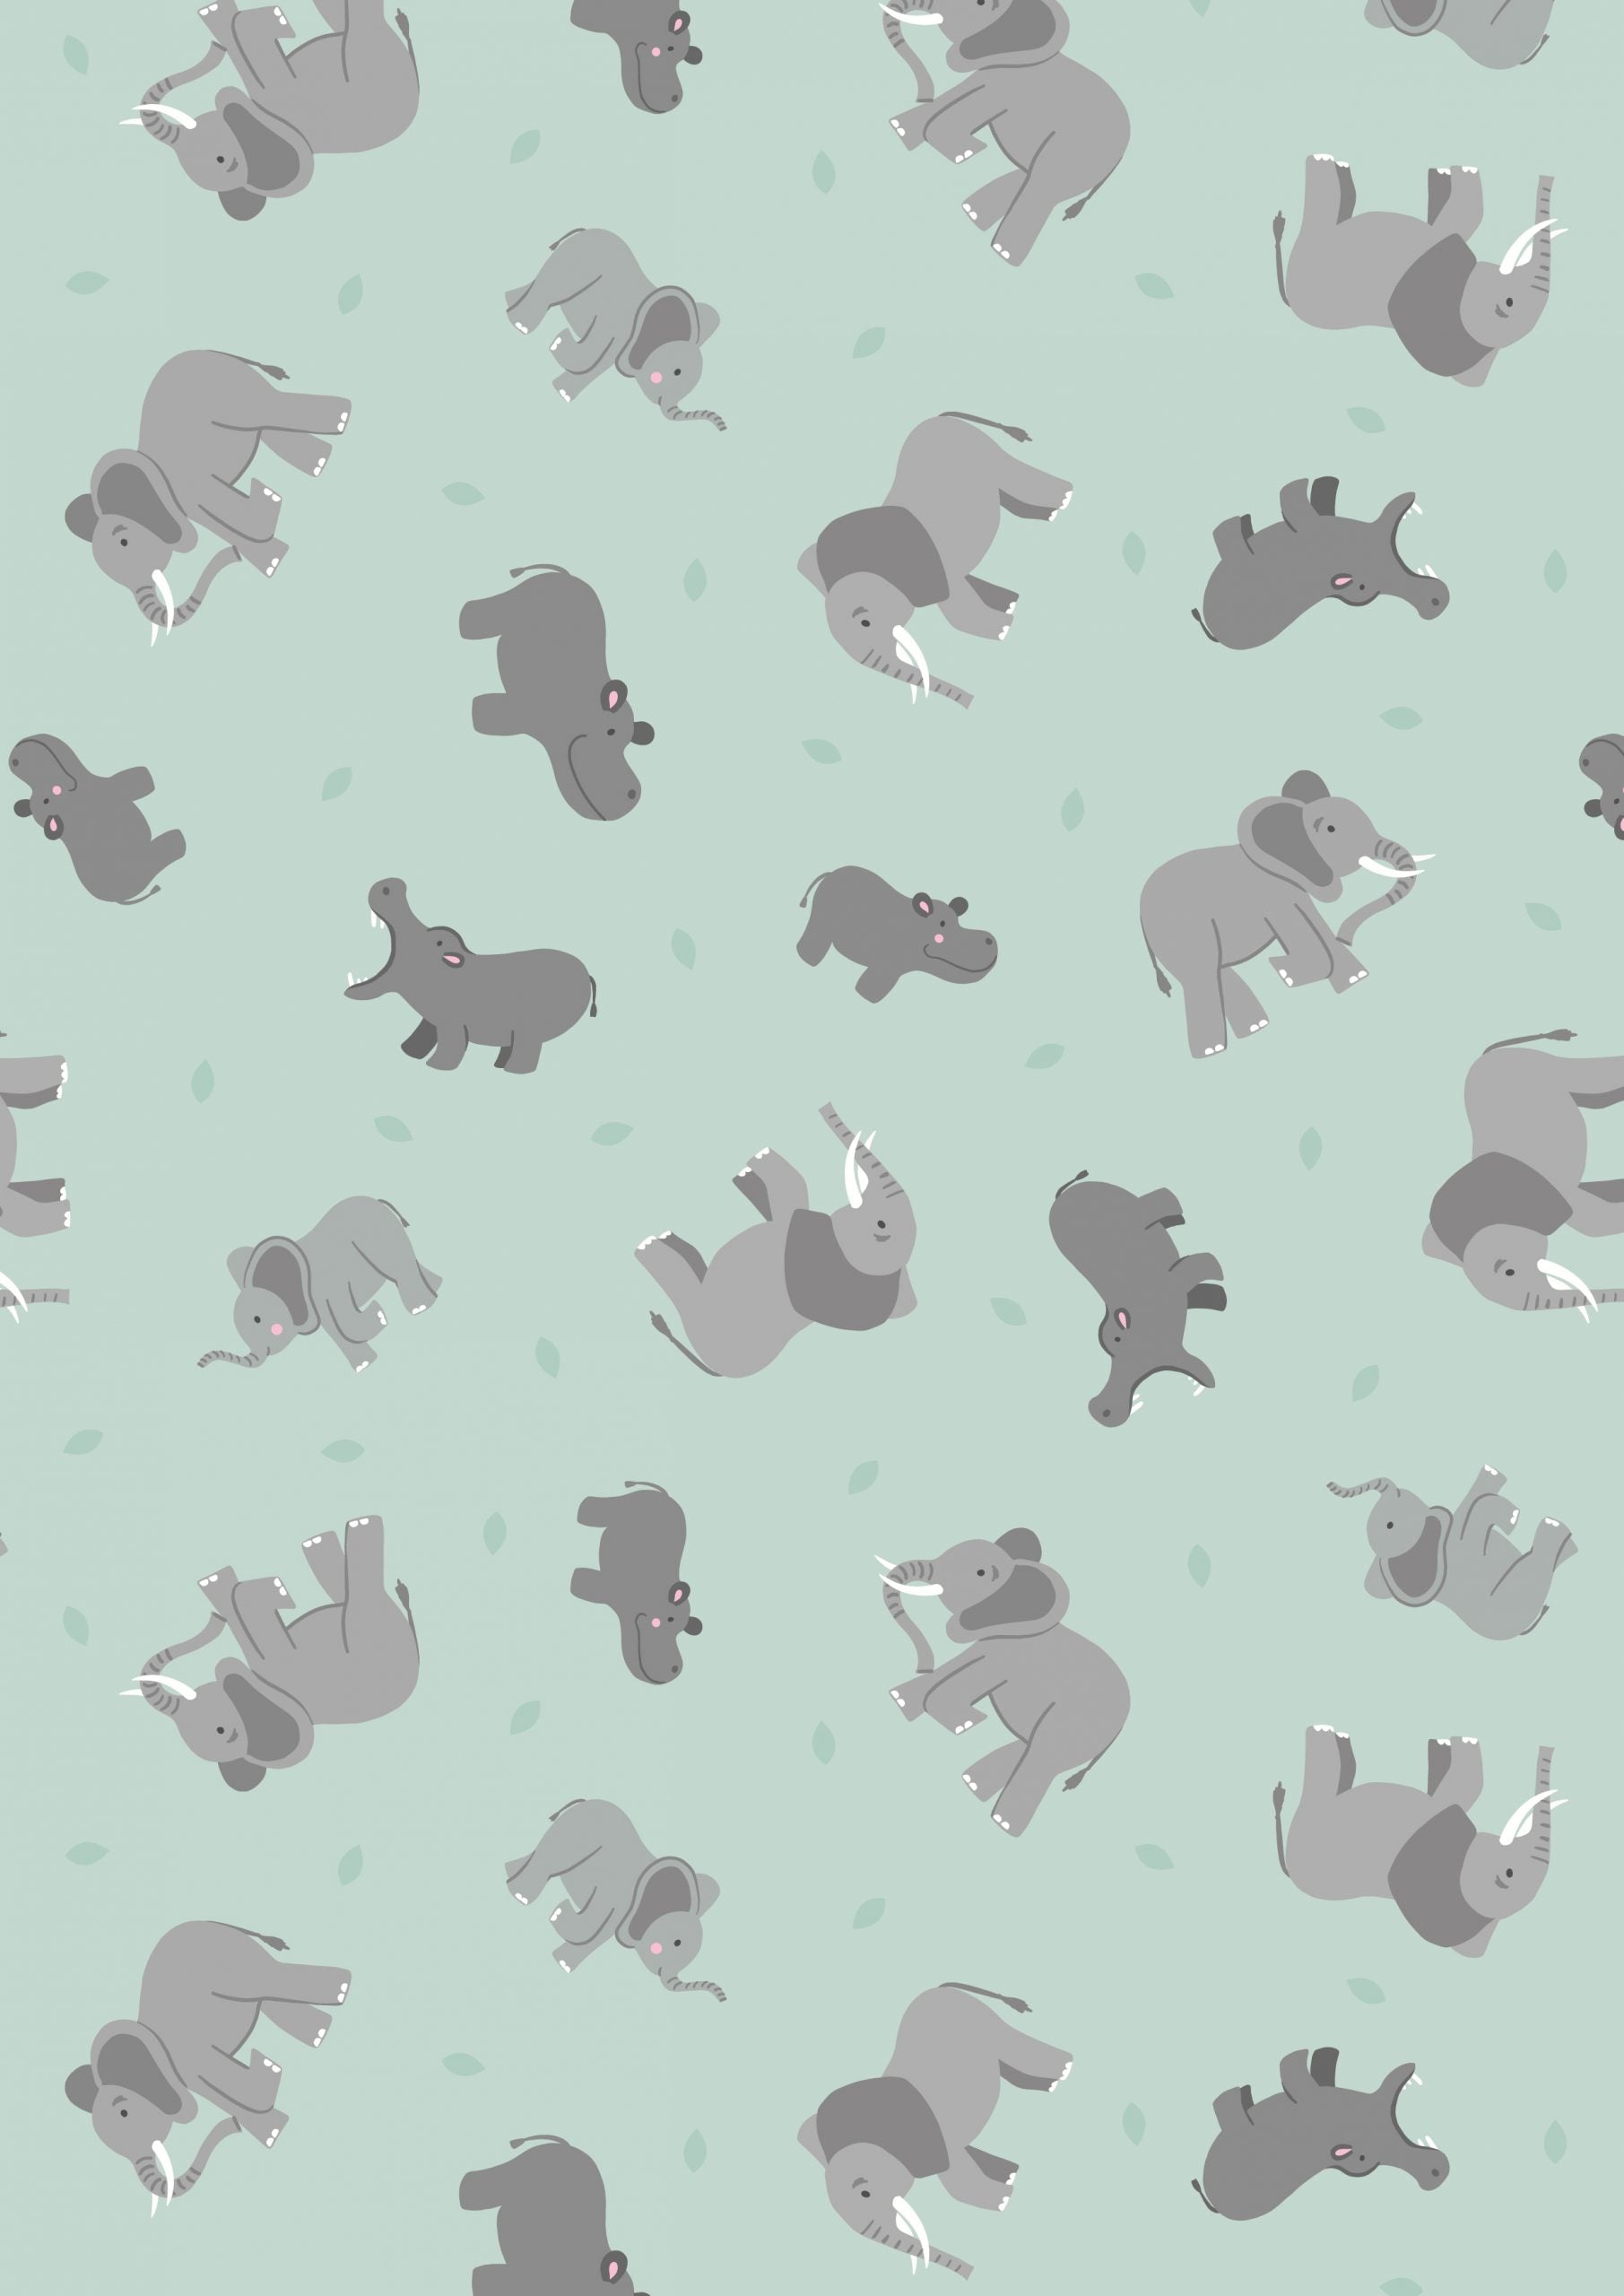 Small Things Wild Animals Quilt Fabric - Elephants and Hippos in Light Blue - SM56.2